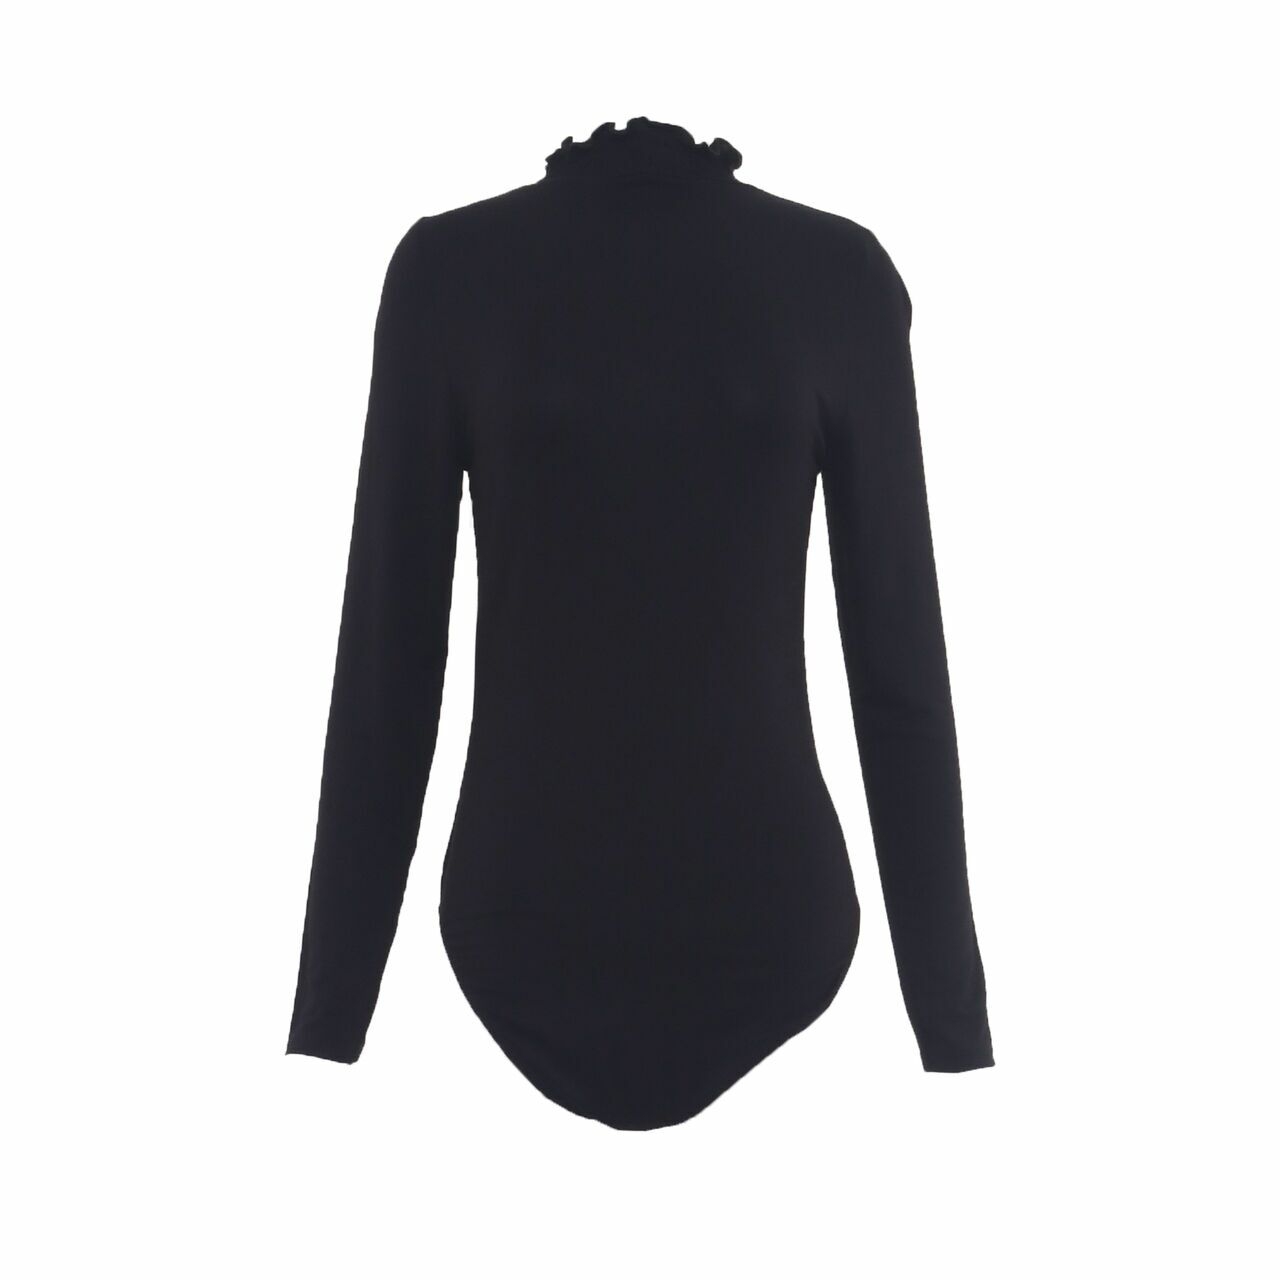 New Look Black One Piece Blouse 